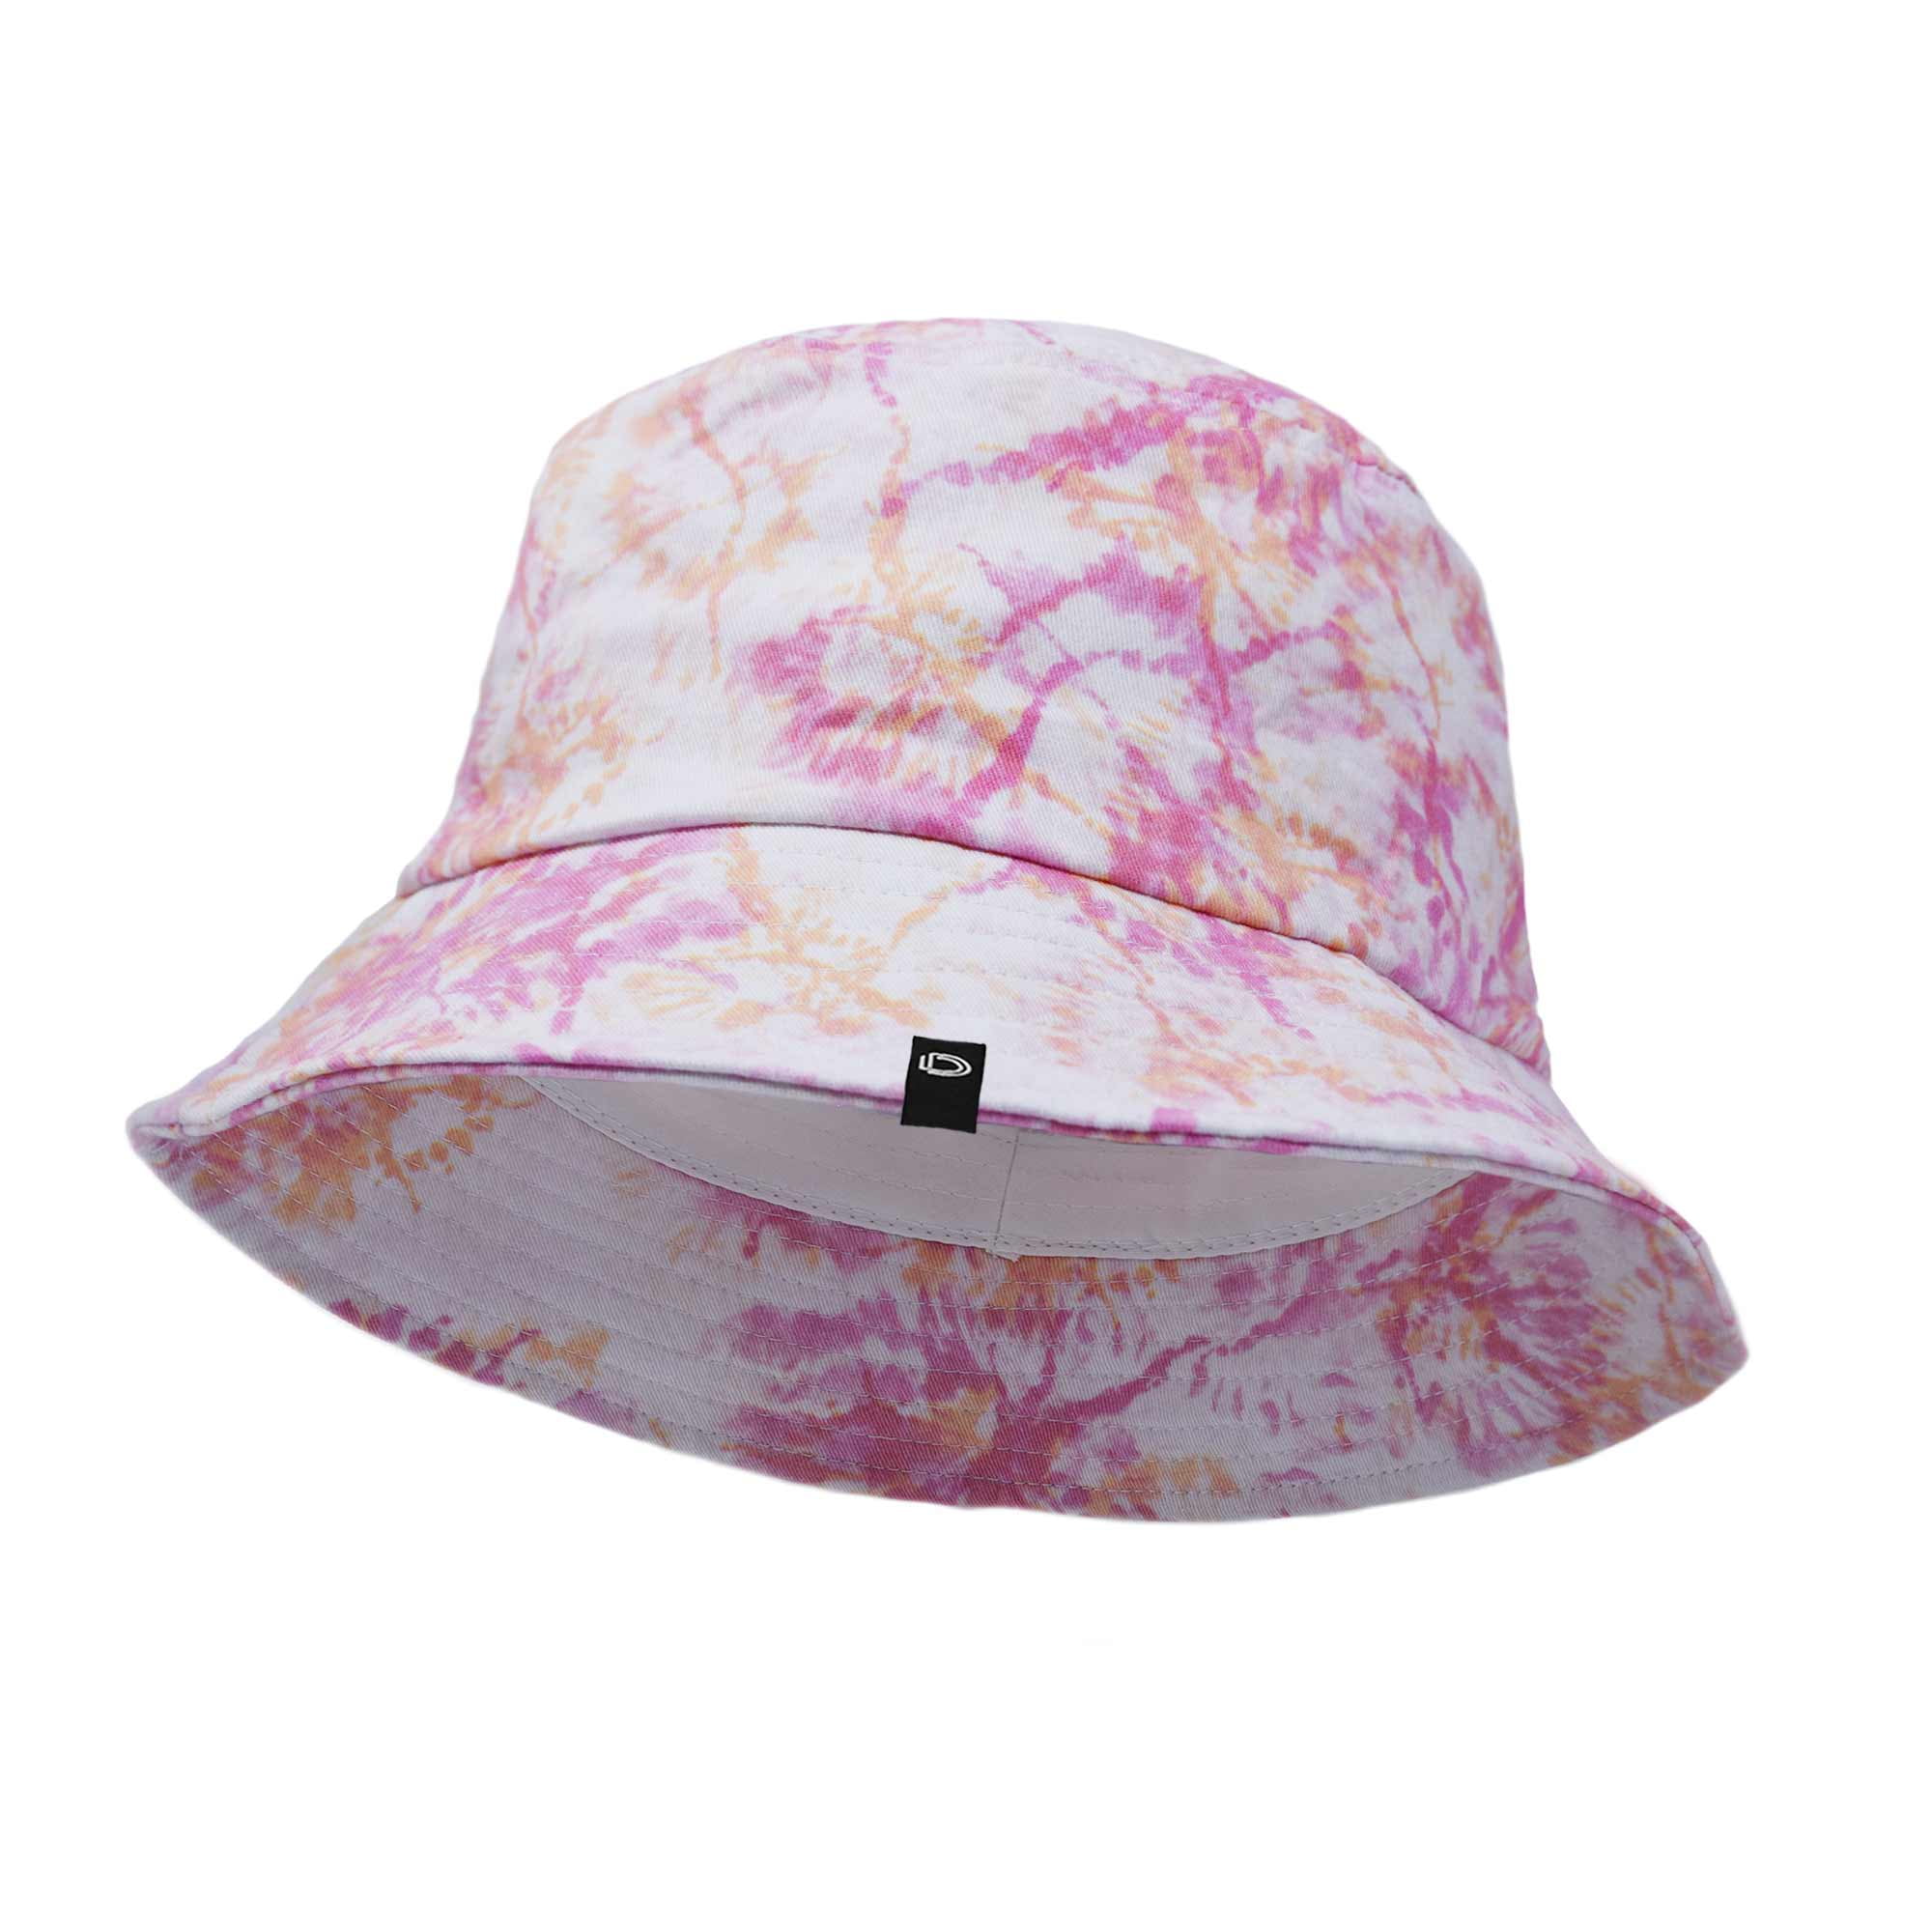 Columbia Unisex Adult Contemporary Bucket Hat, Pink Dawn Iridescent,  Large-X-Large US